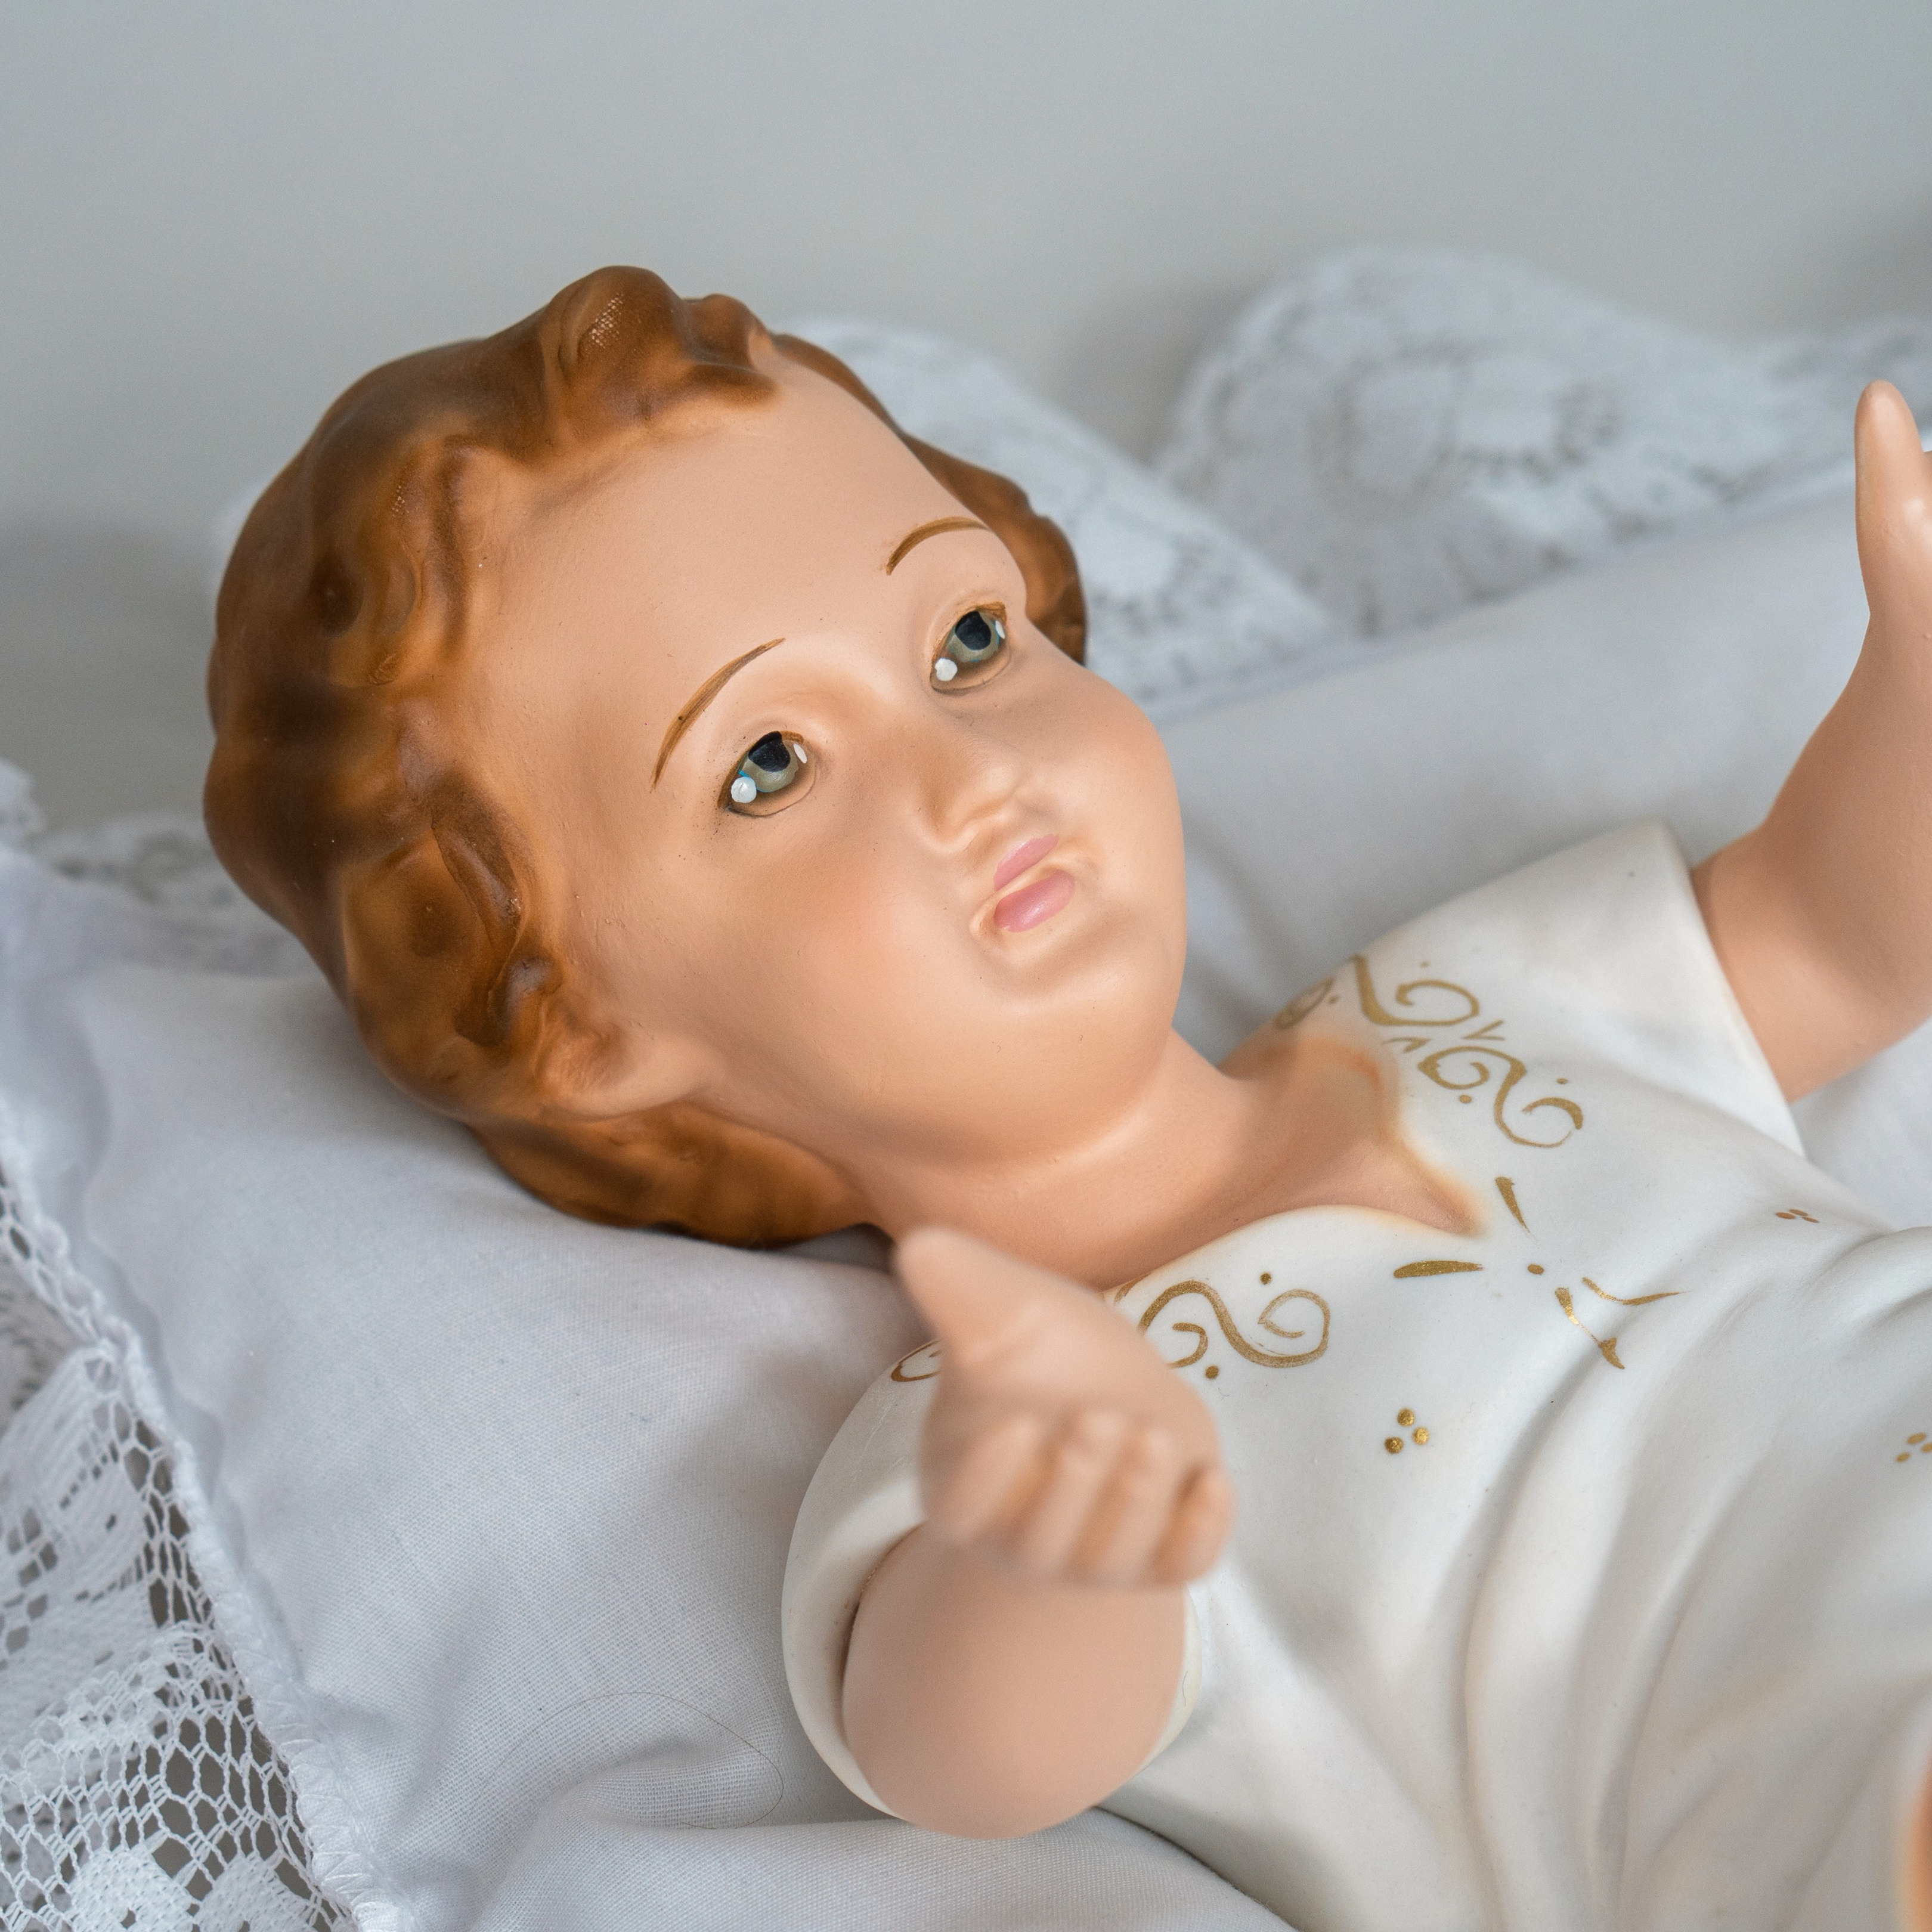 The Baby Jesus by The Faith Gift Shop Collection with Pillow -  Nino Jesus -Divino Bambino